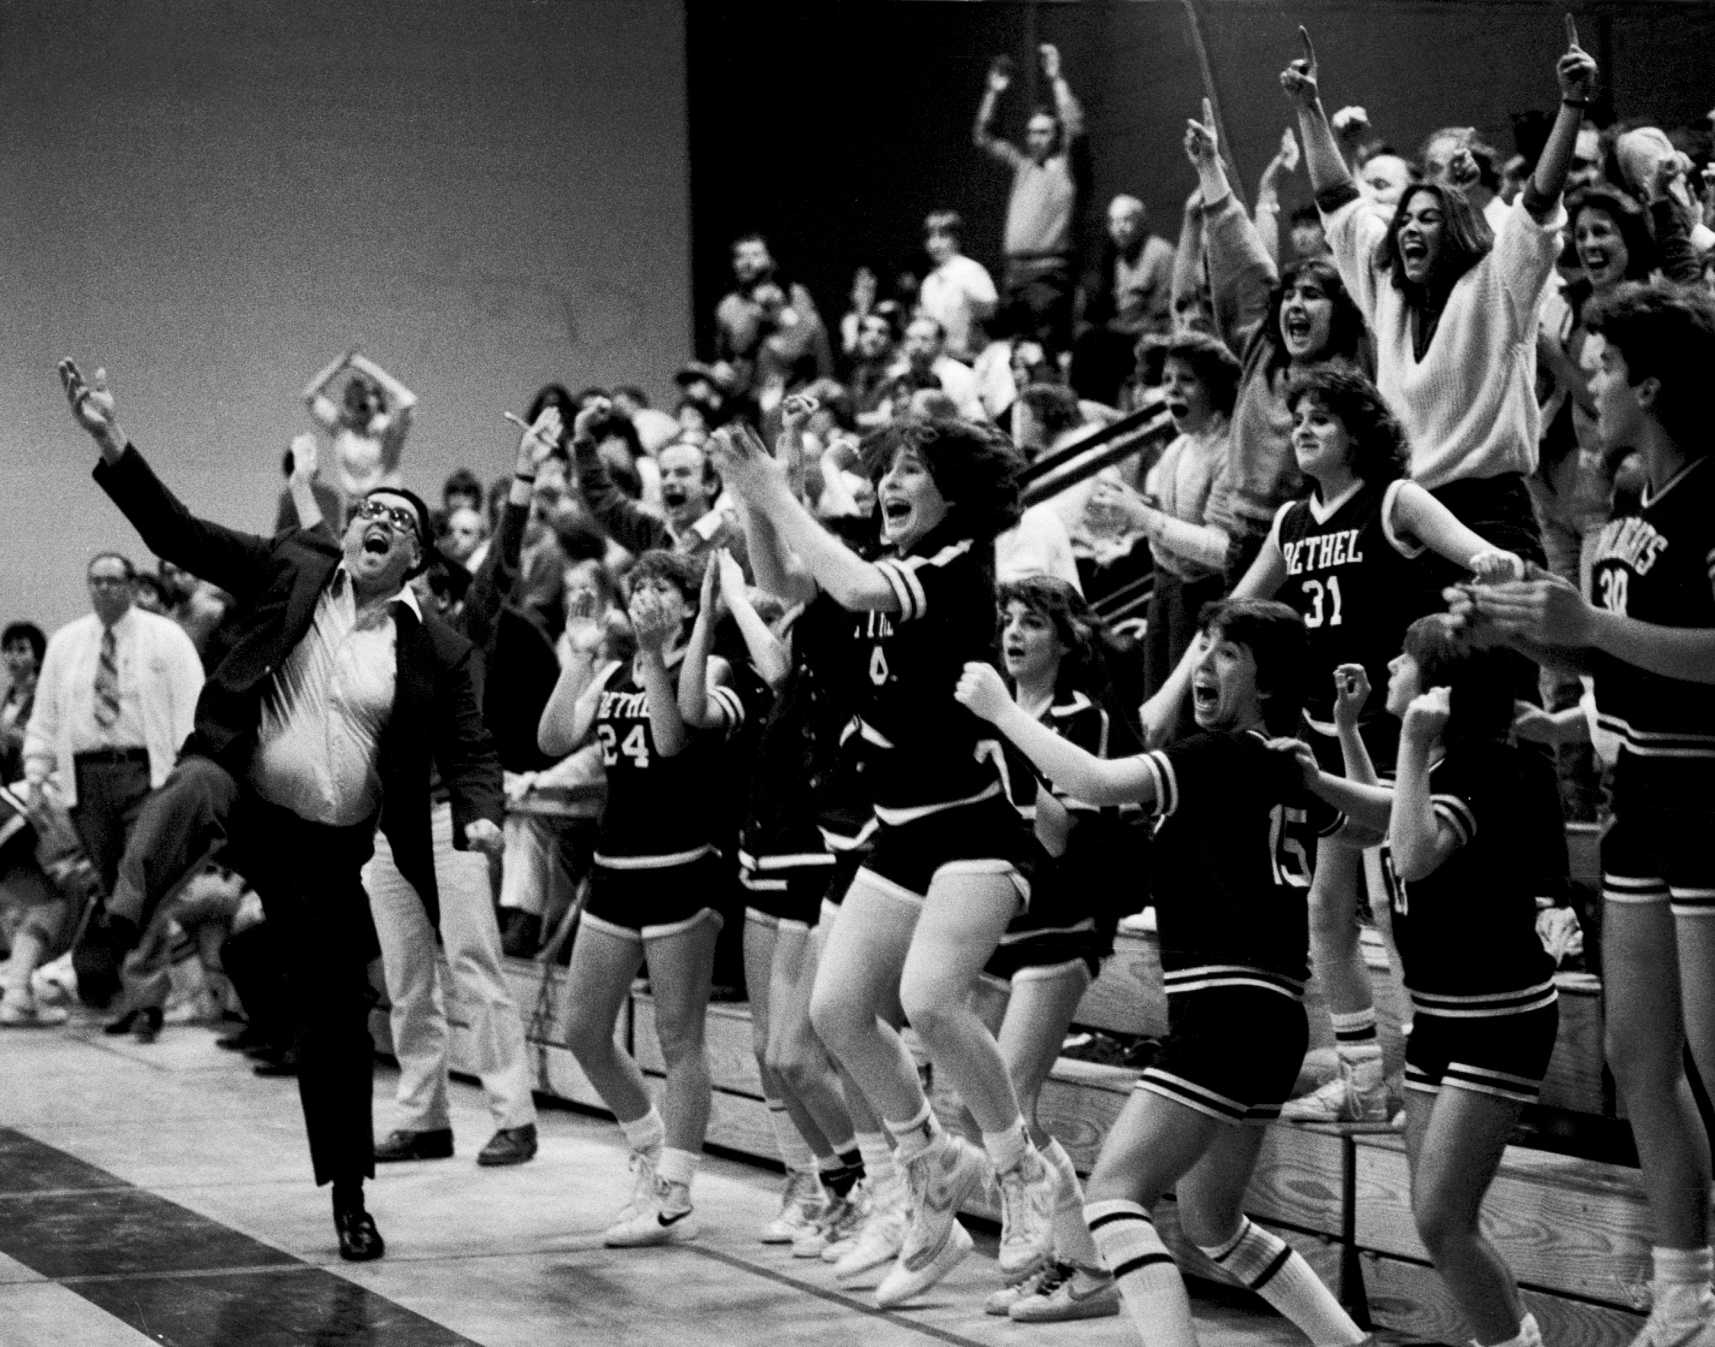 Coach, team and fans cheer a basketball championship win for the Bethel High School’s girls team. 1985